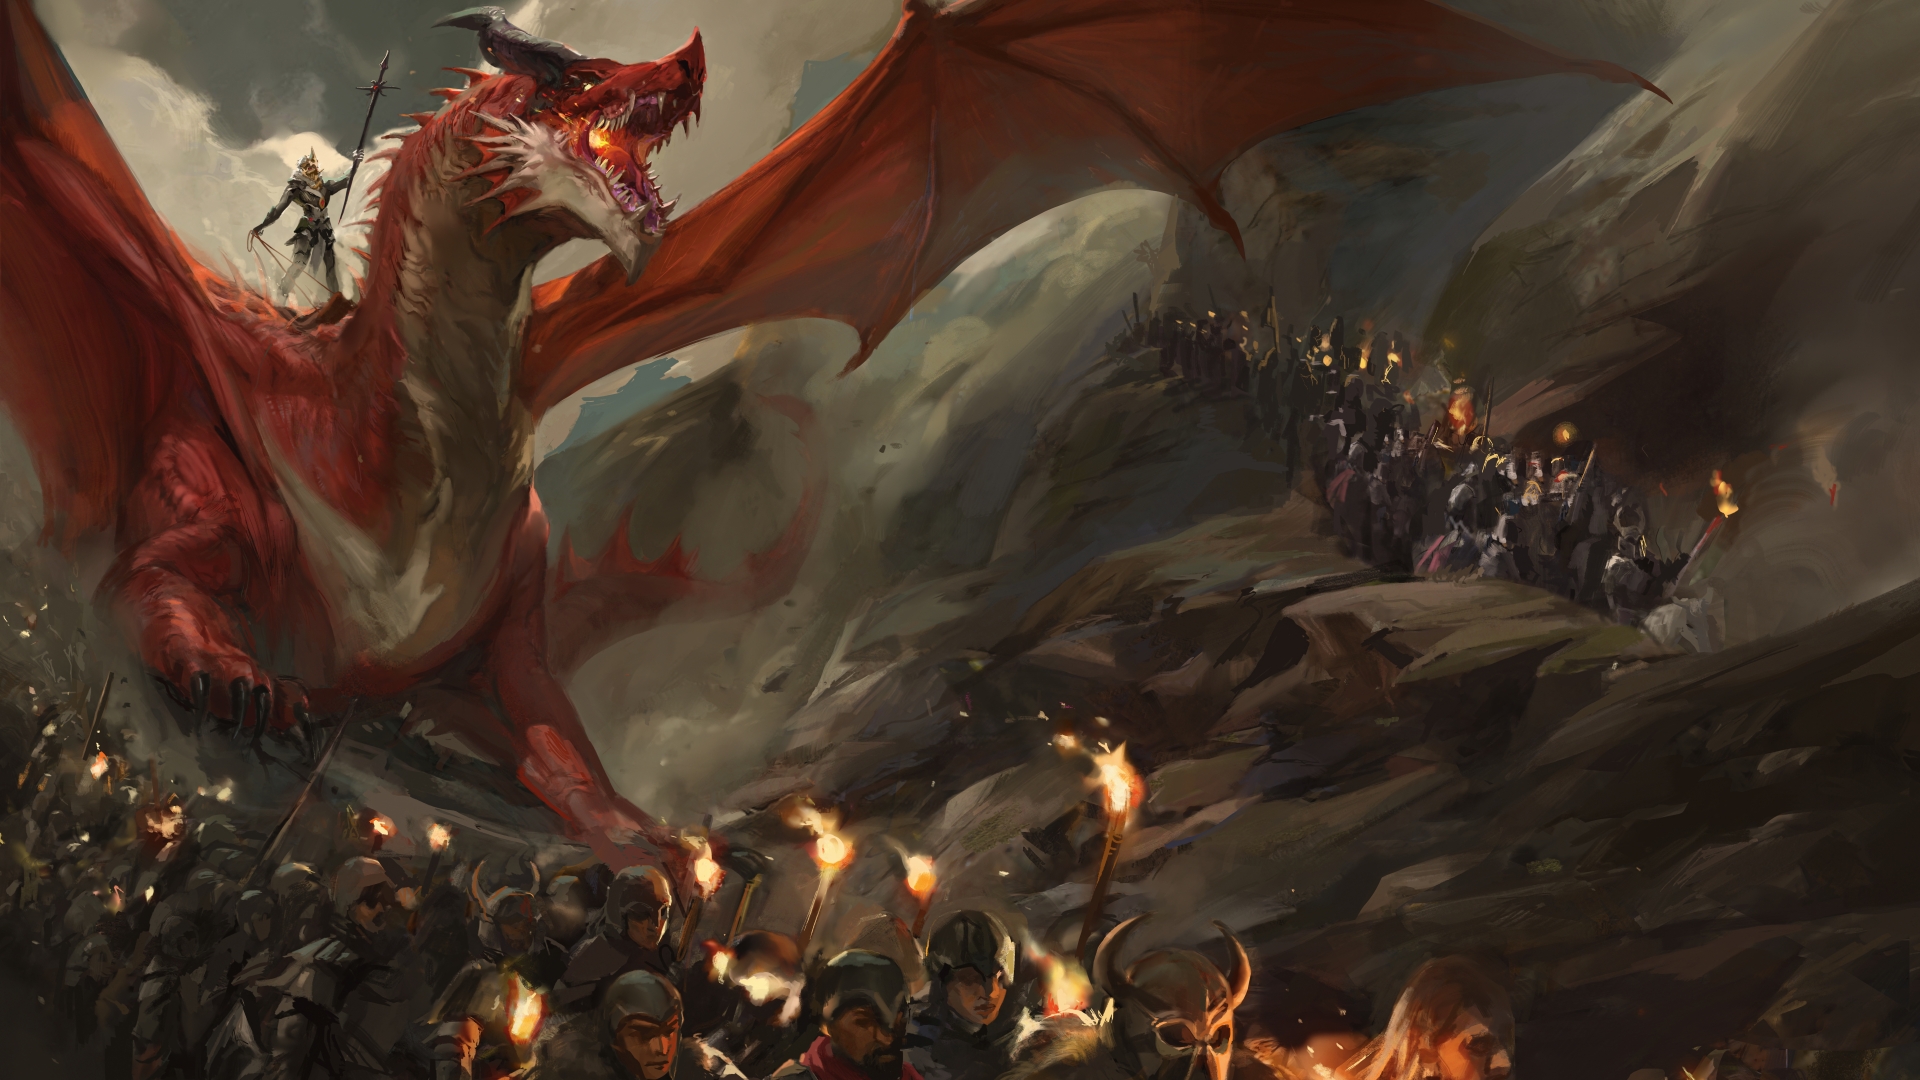 A dragon army on the march